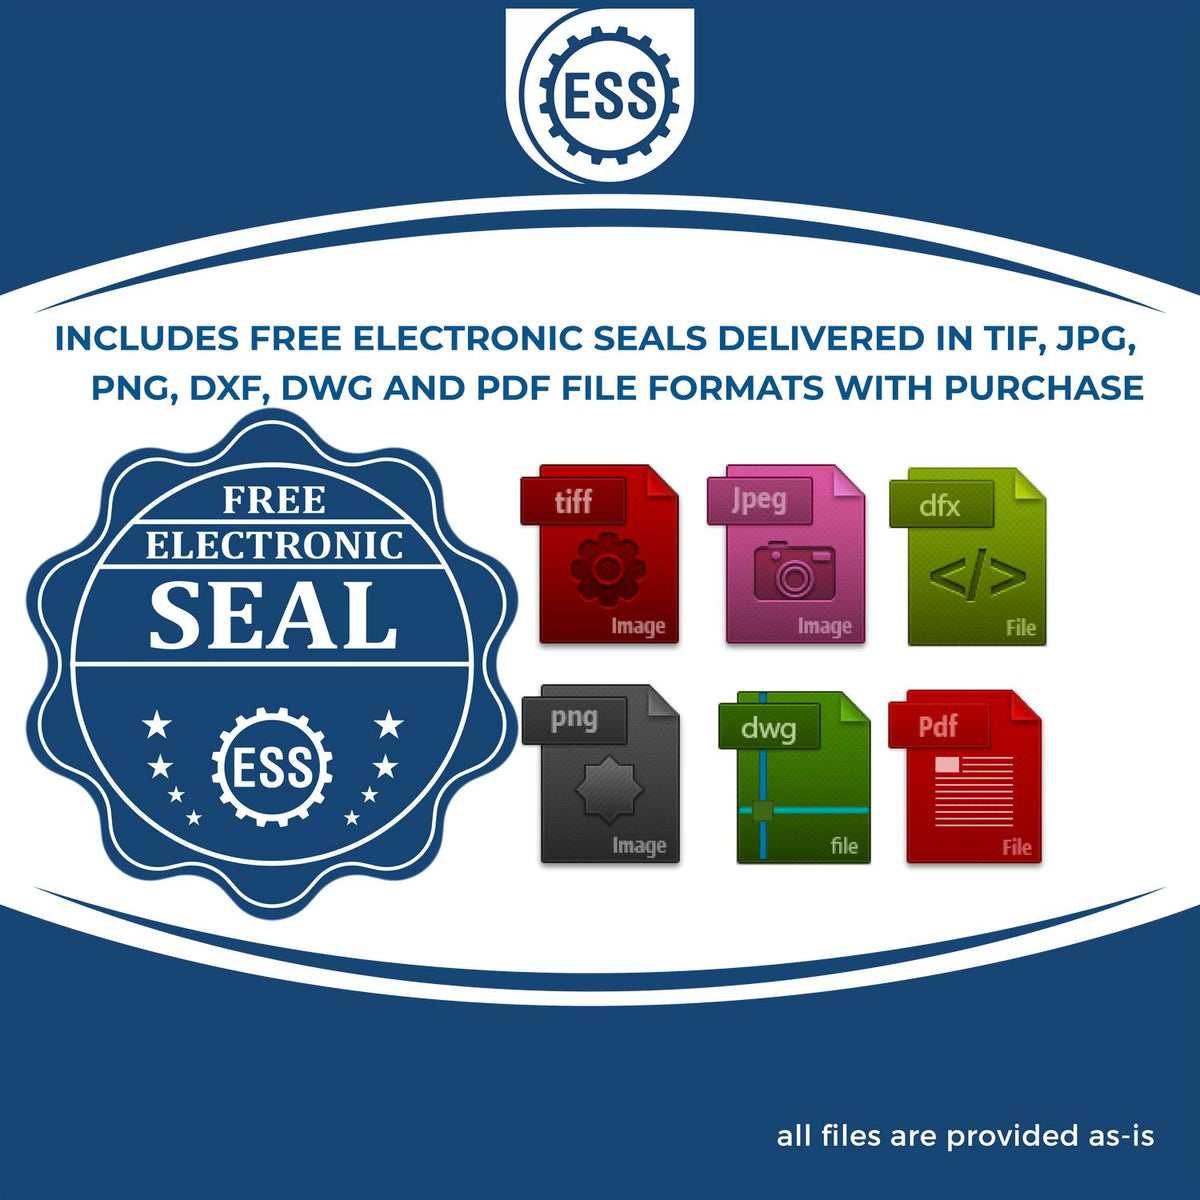 An infographic for the free electronic seal for the Self-Inking South Dakota Geologist Stamp illustrating the different file type icons such as DXF, DWG, TIF, JPG and PNG.